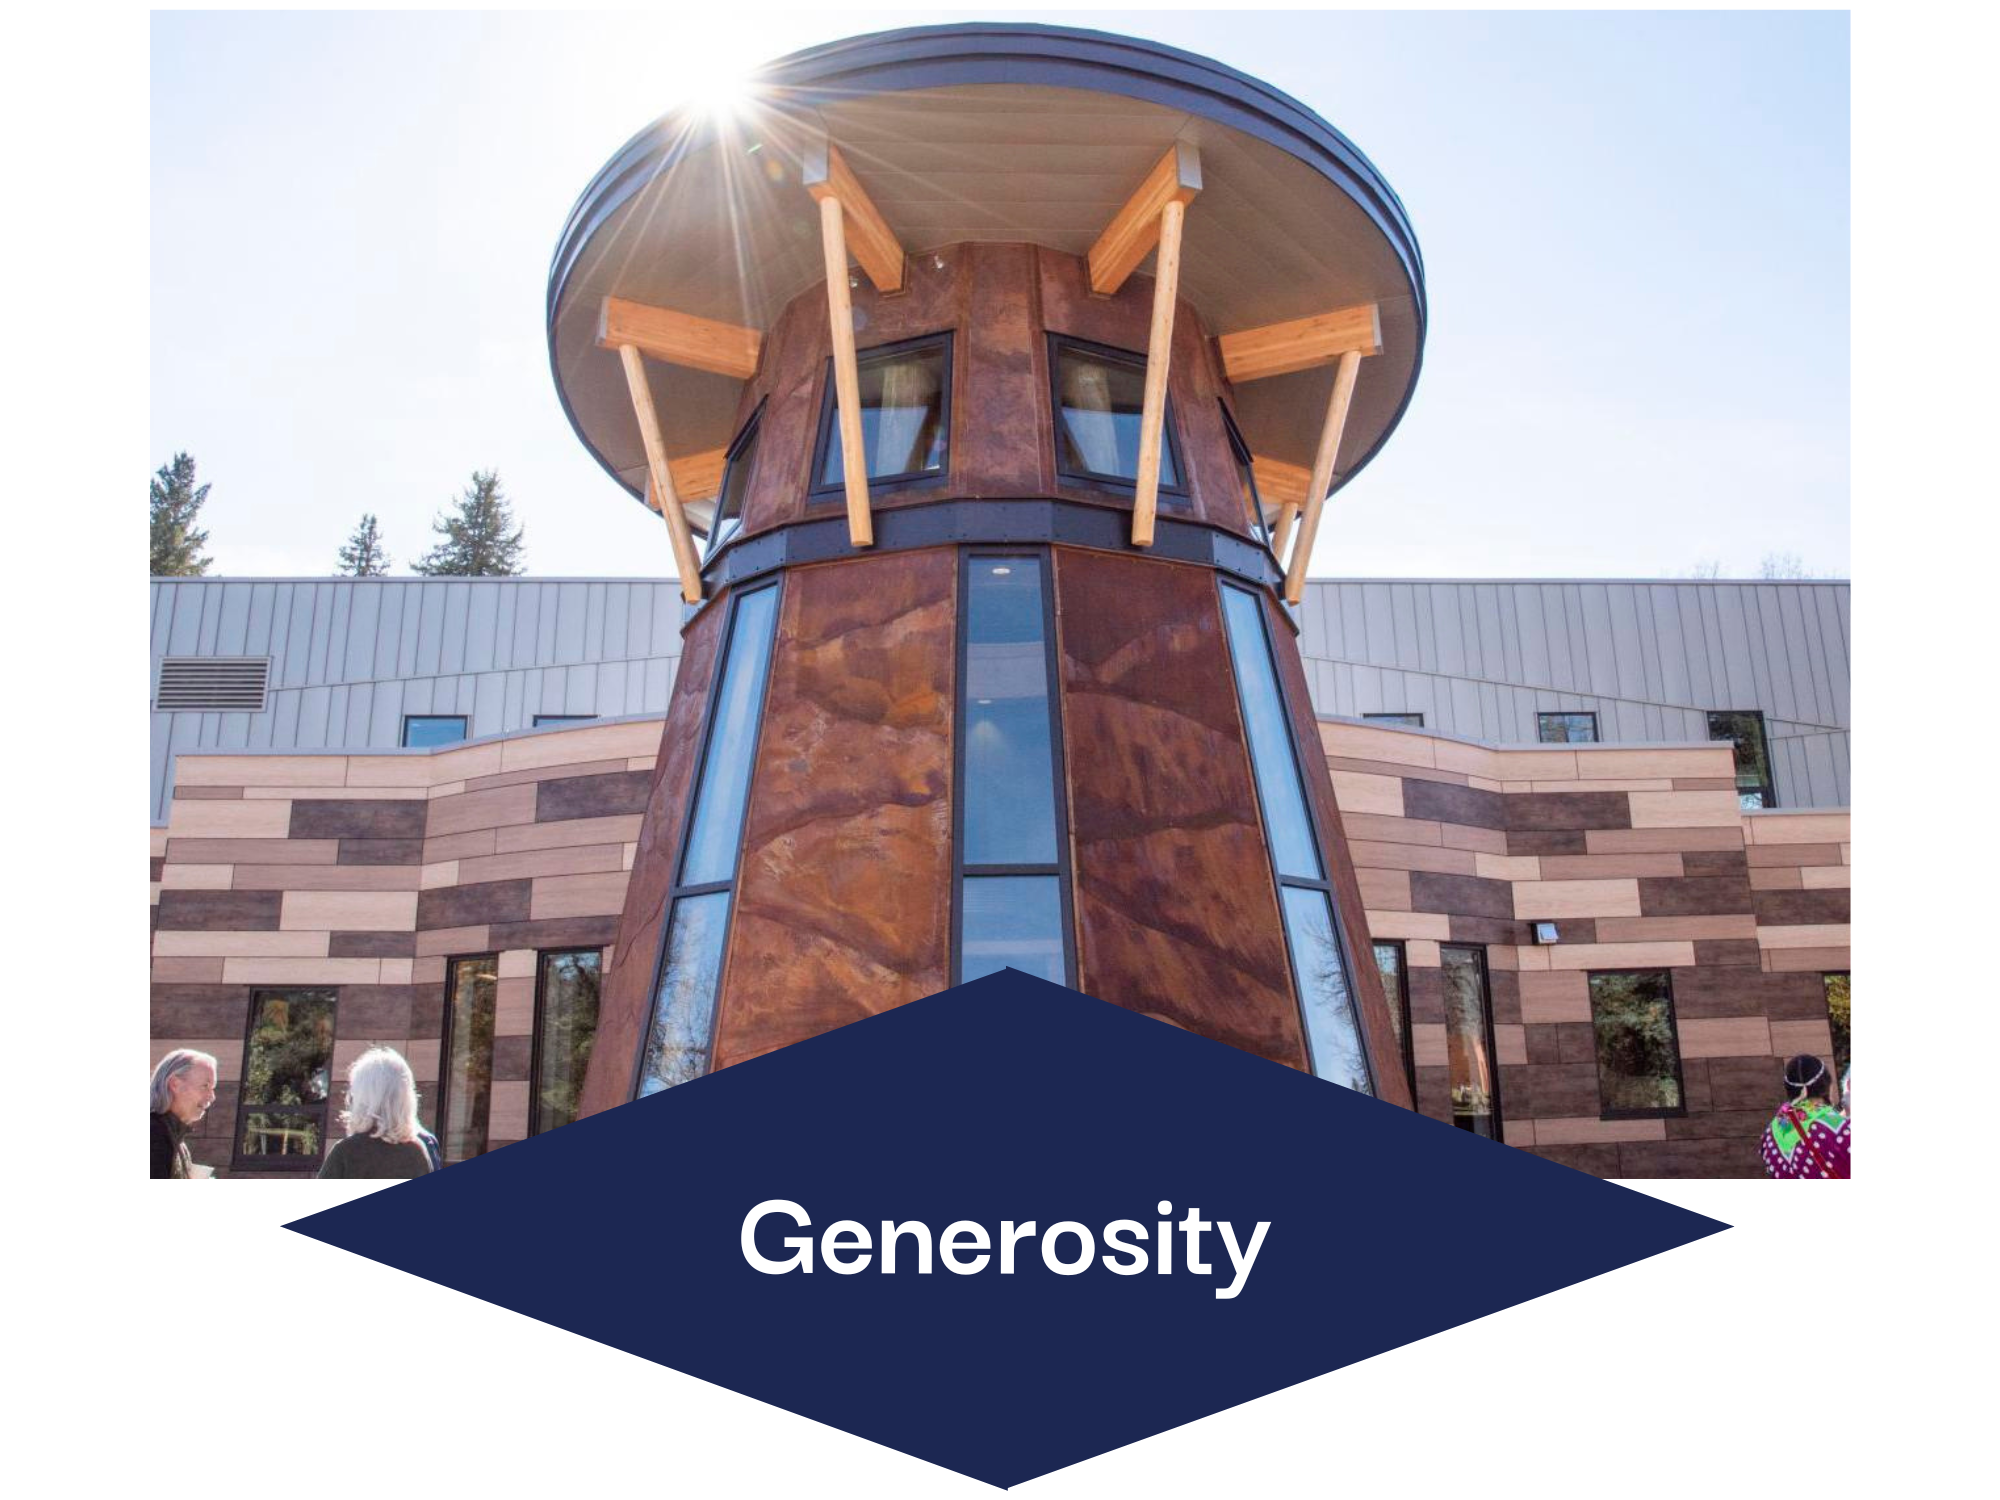 The Generosity section of the Cultural Values model, showing the American Indian Hall.